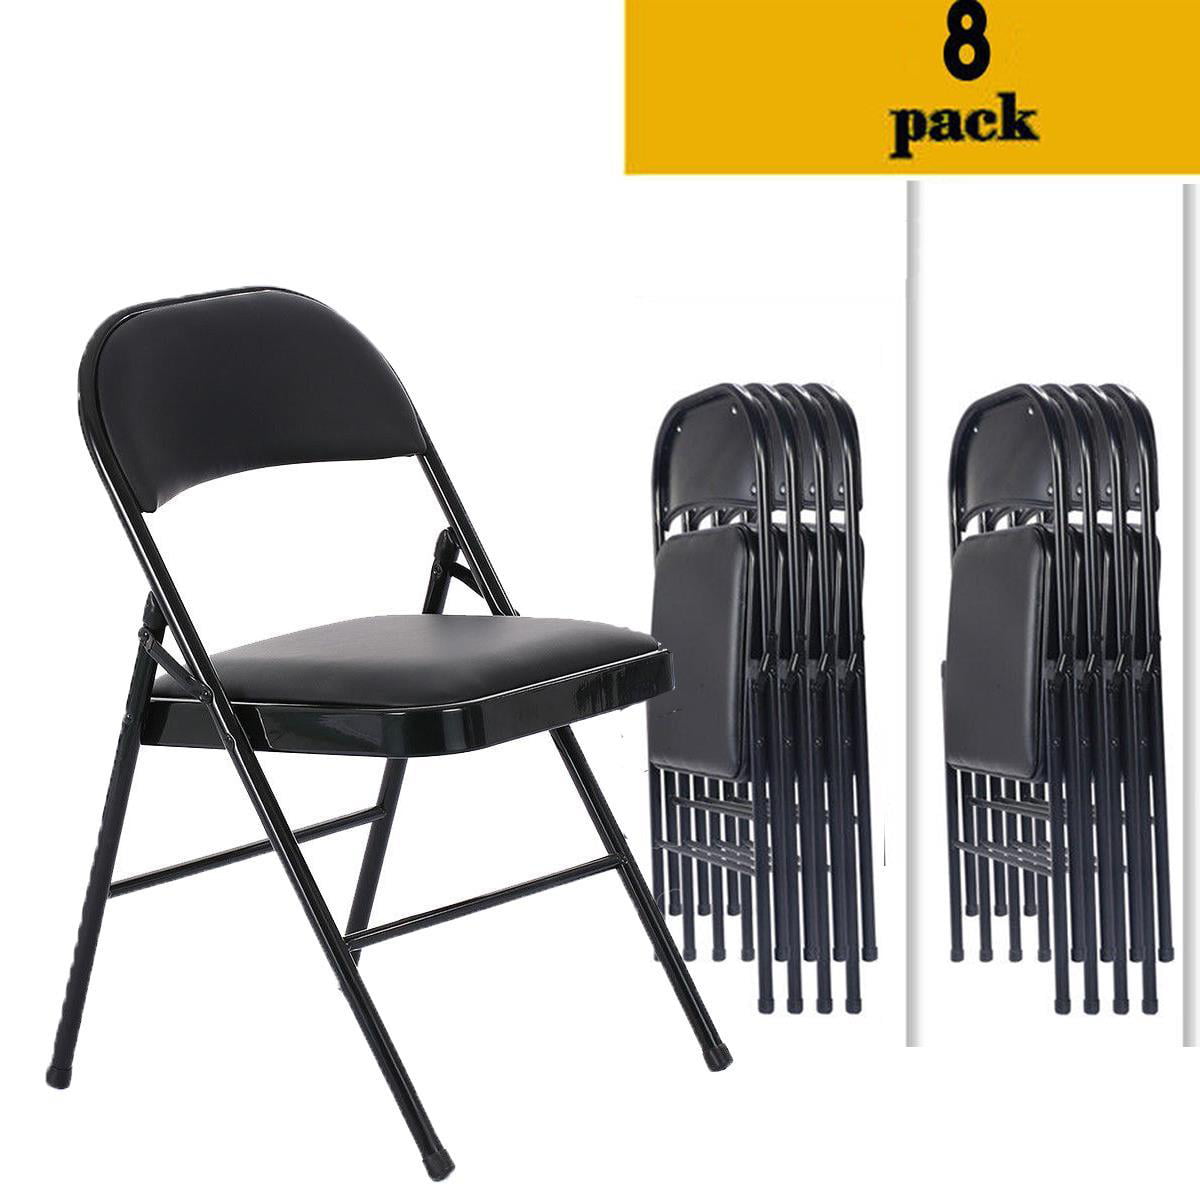 Zimtown 8 Pack Folding Chair Fabric Upholstered Padded Seat Metal